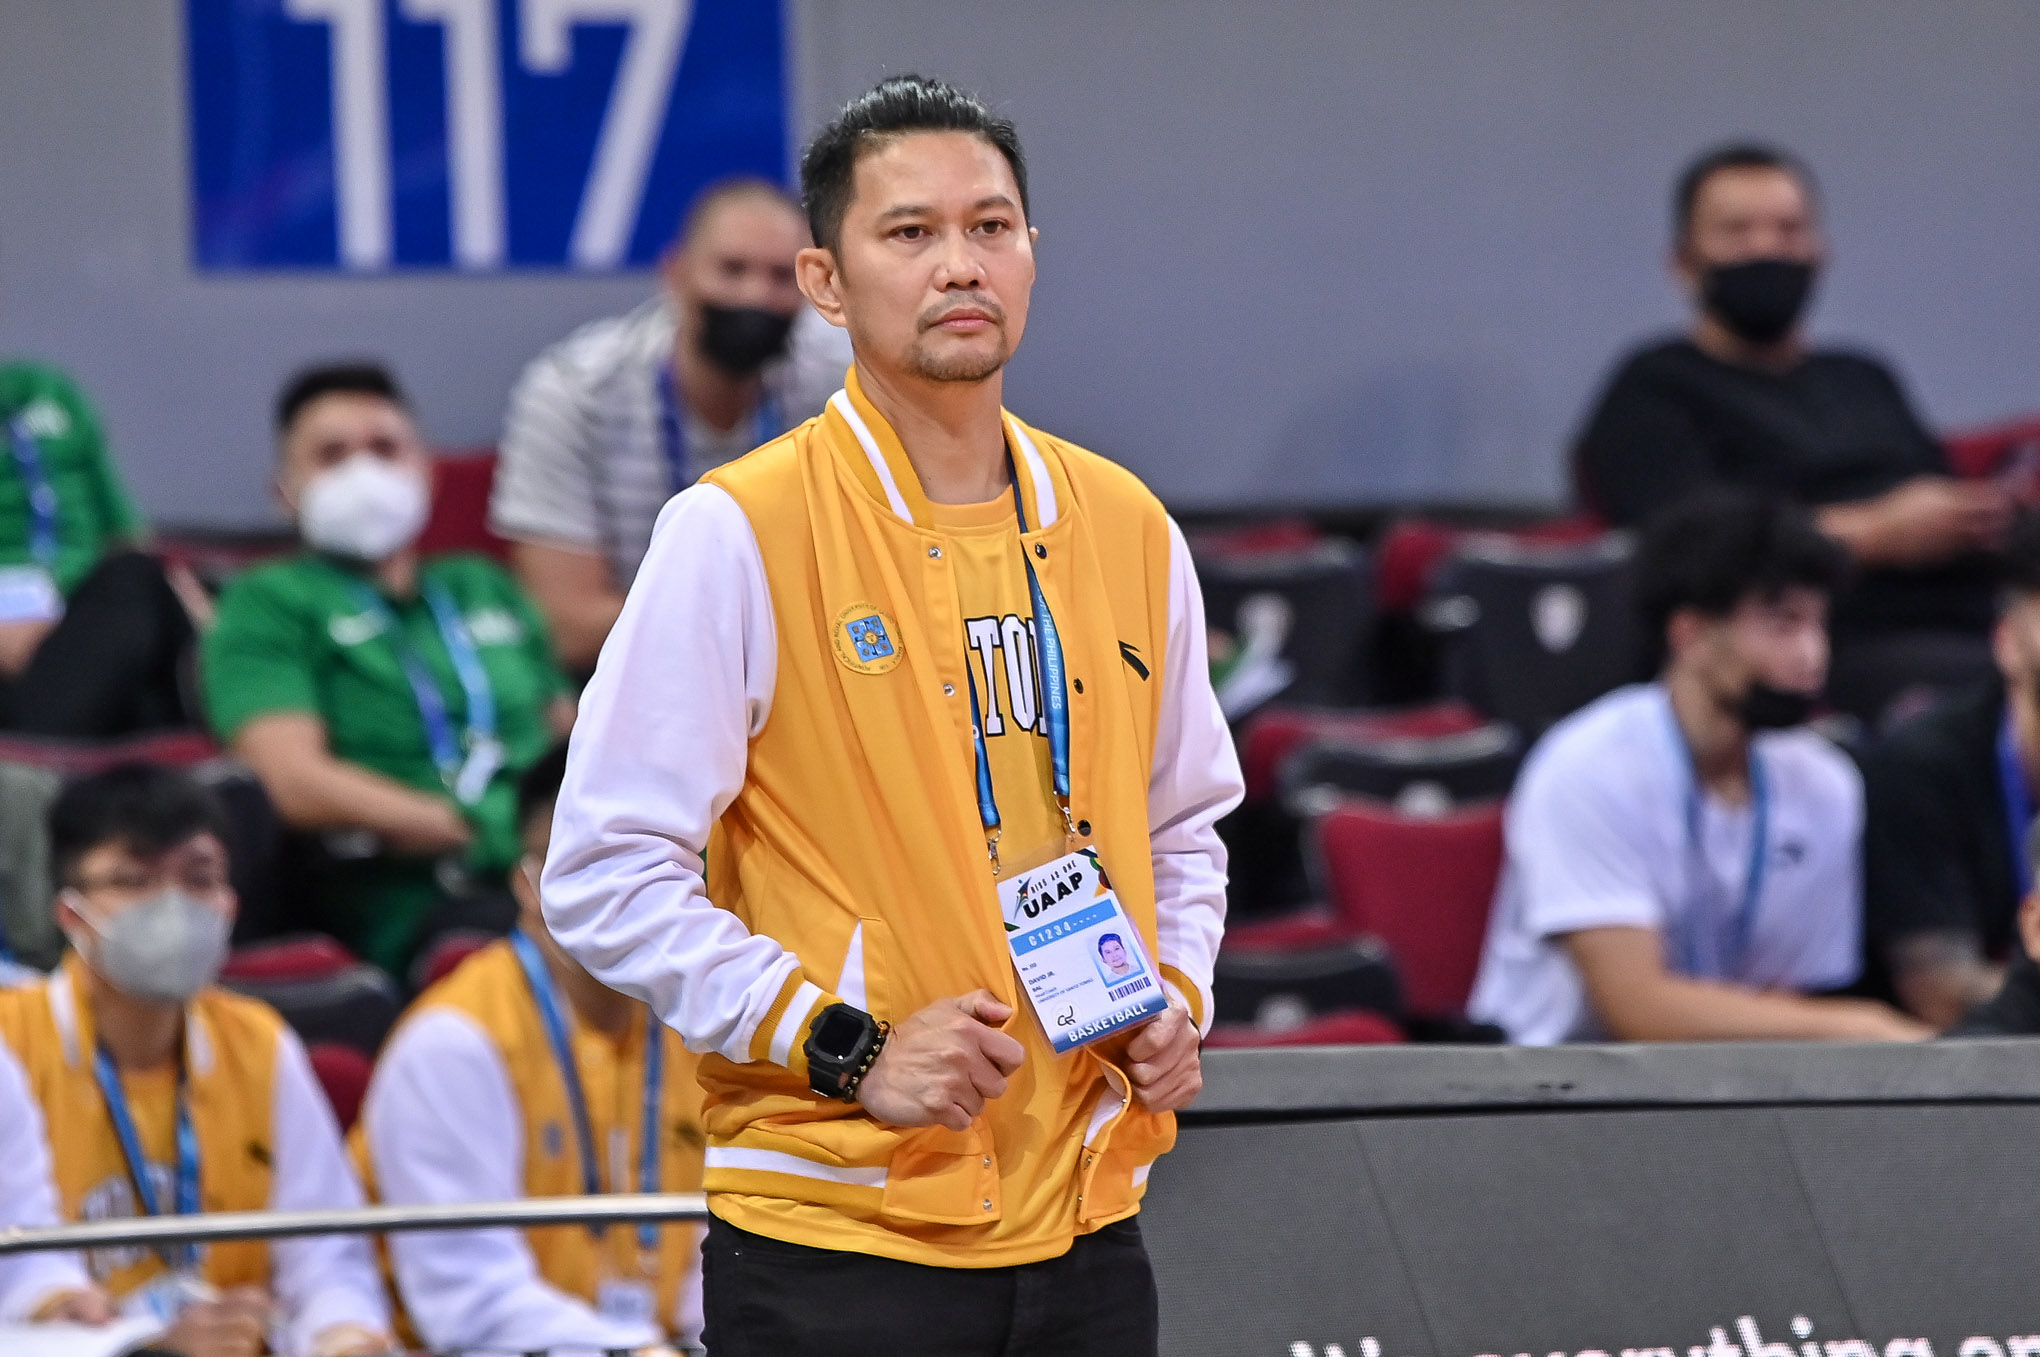 UAAP85-Bal-David With parents watching Nic Cabanero makes sure to put on a show Basketball News UAAP UST  - philippine sports news